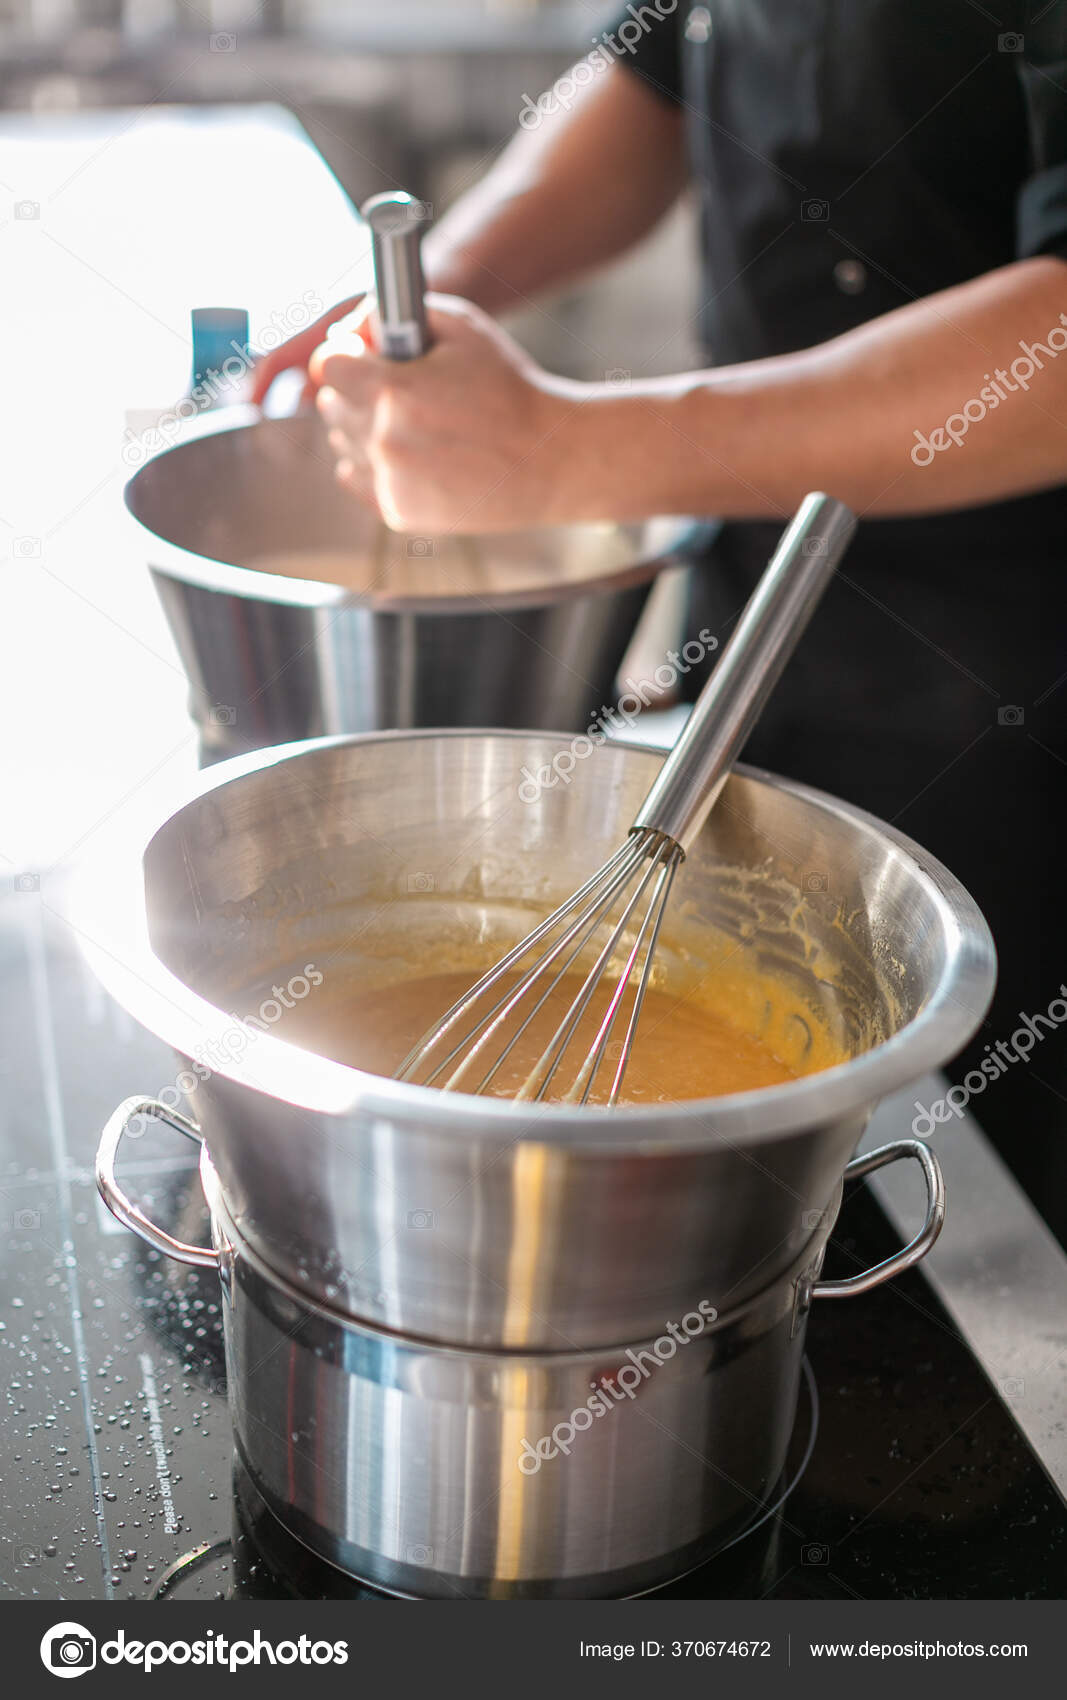 Using a Double Boiler